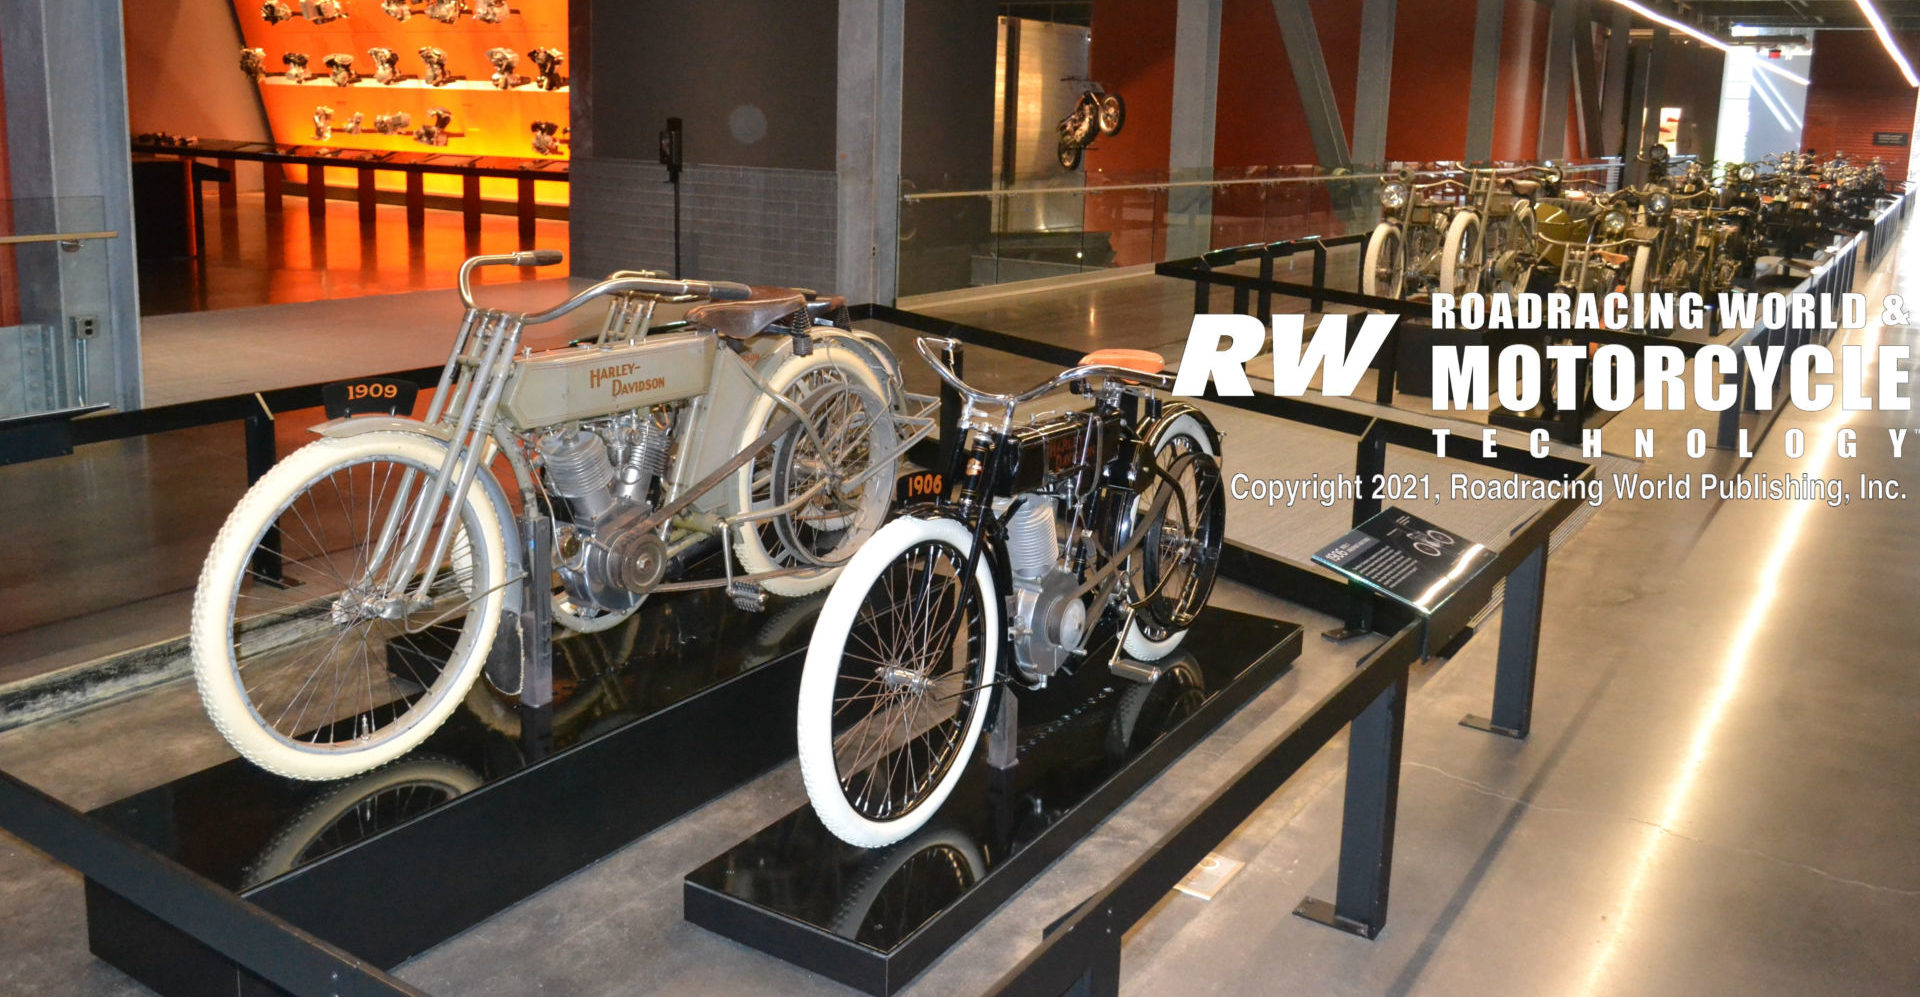 One of the exhibit halls at the Harley-Davidson Museum in Milwaukee, Wisconsin. Photo by David Swarts.